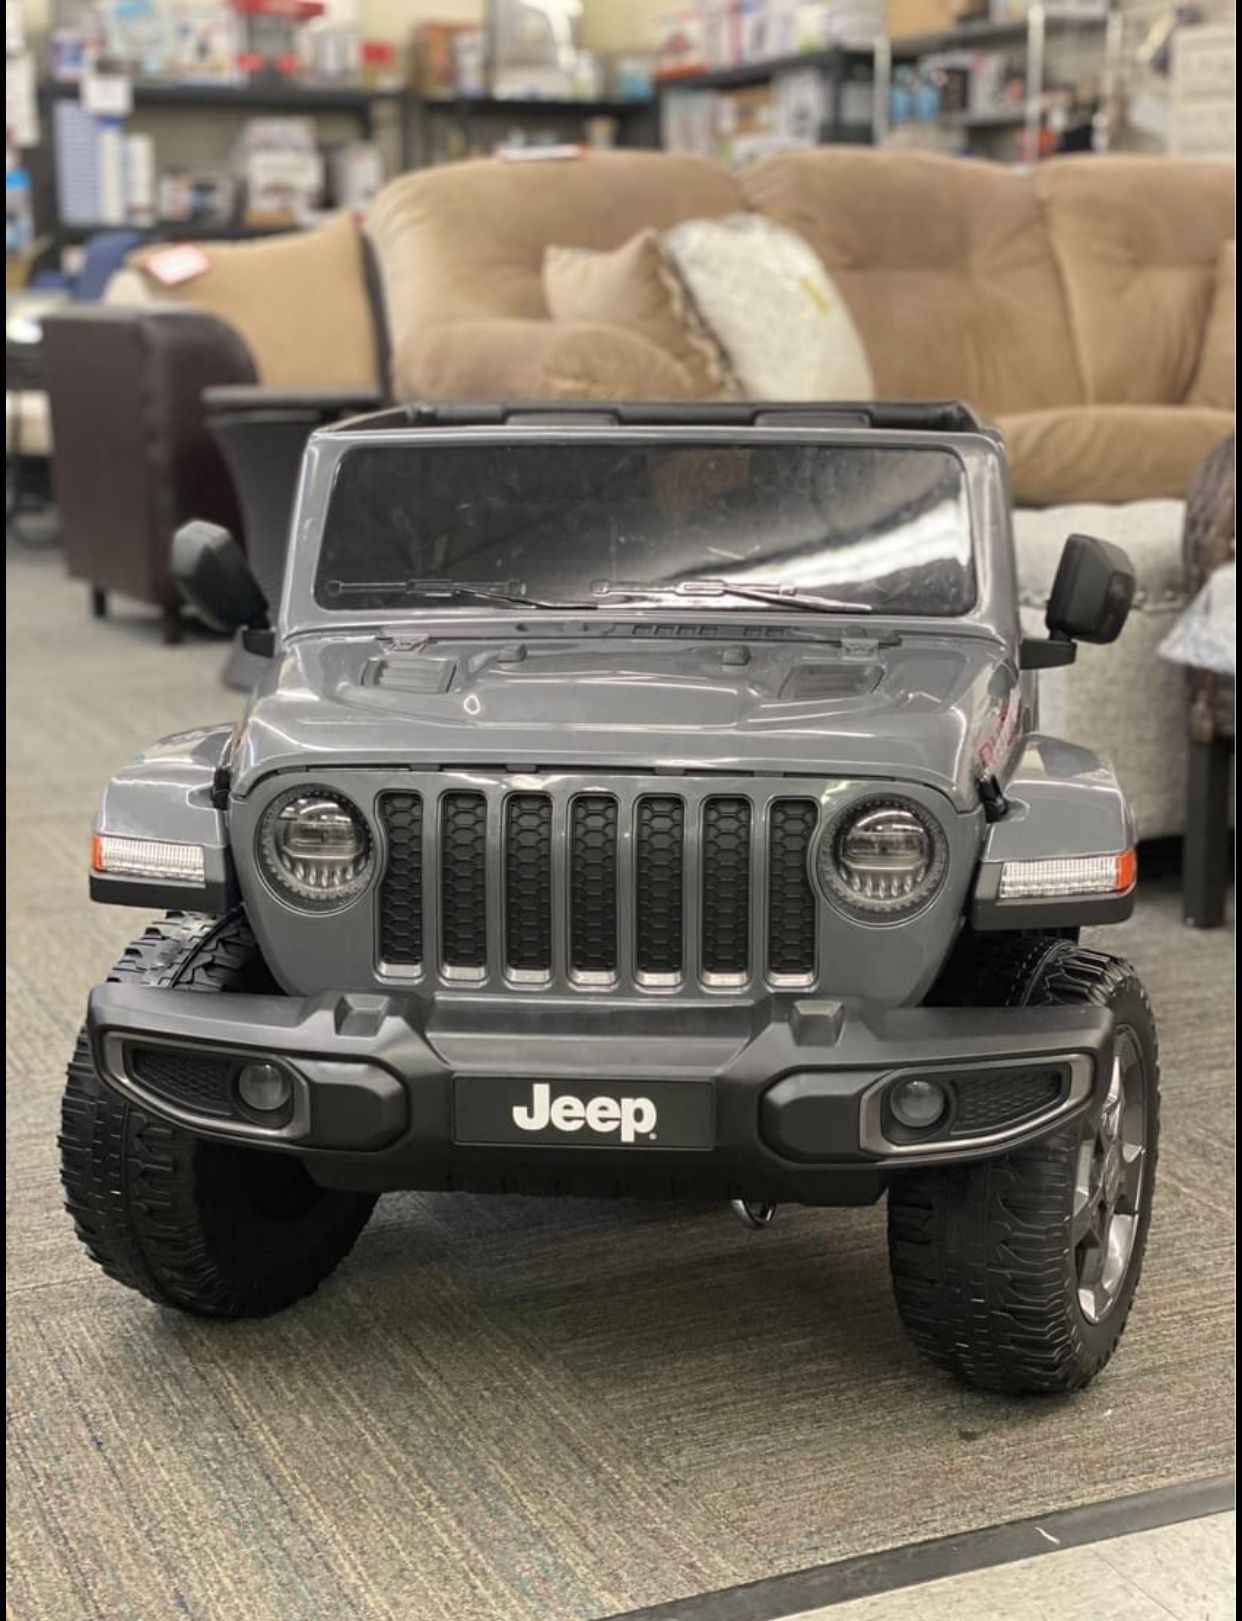 💫Brand New💫 12 volt Jeep Gladiator Battery Powered Ride On Vehicle, Gray